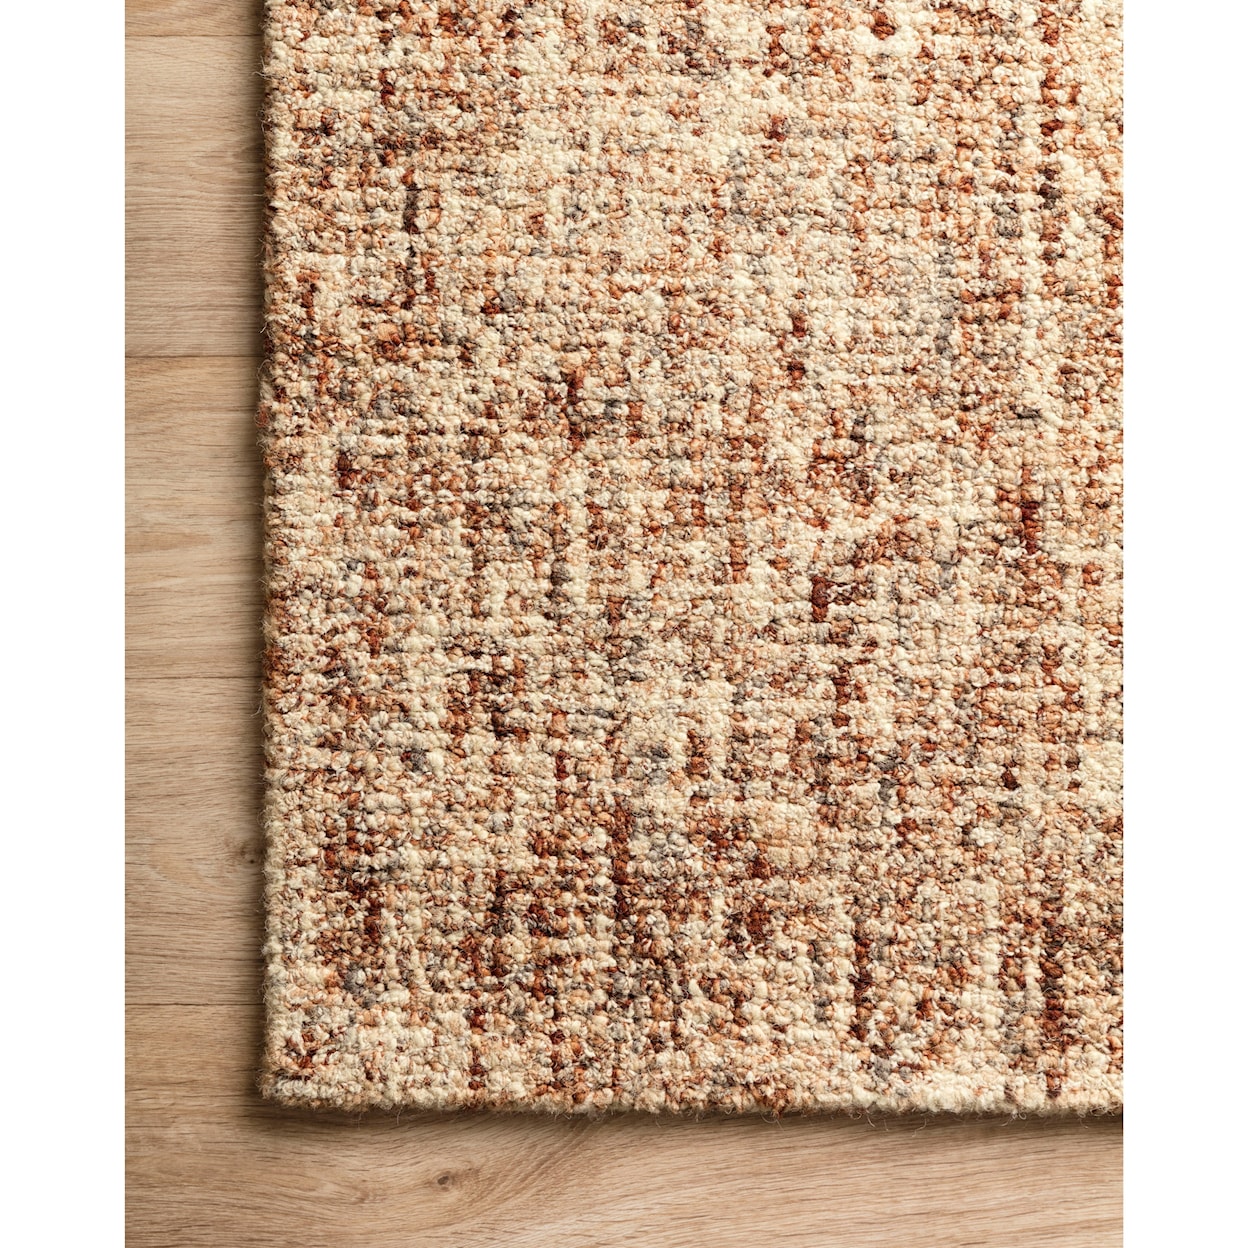 Reeds Rugs Harlow 3'6" x 5'6" Rust / Charcoal Rug